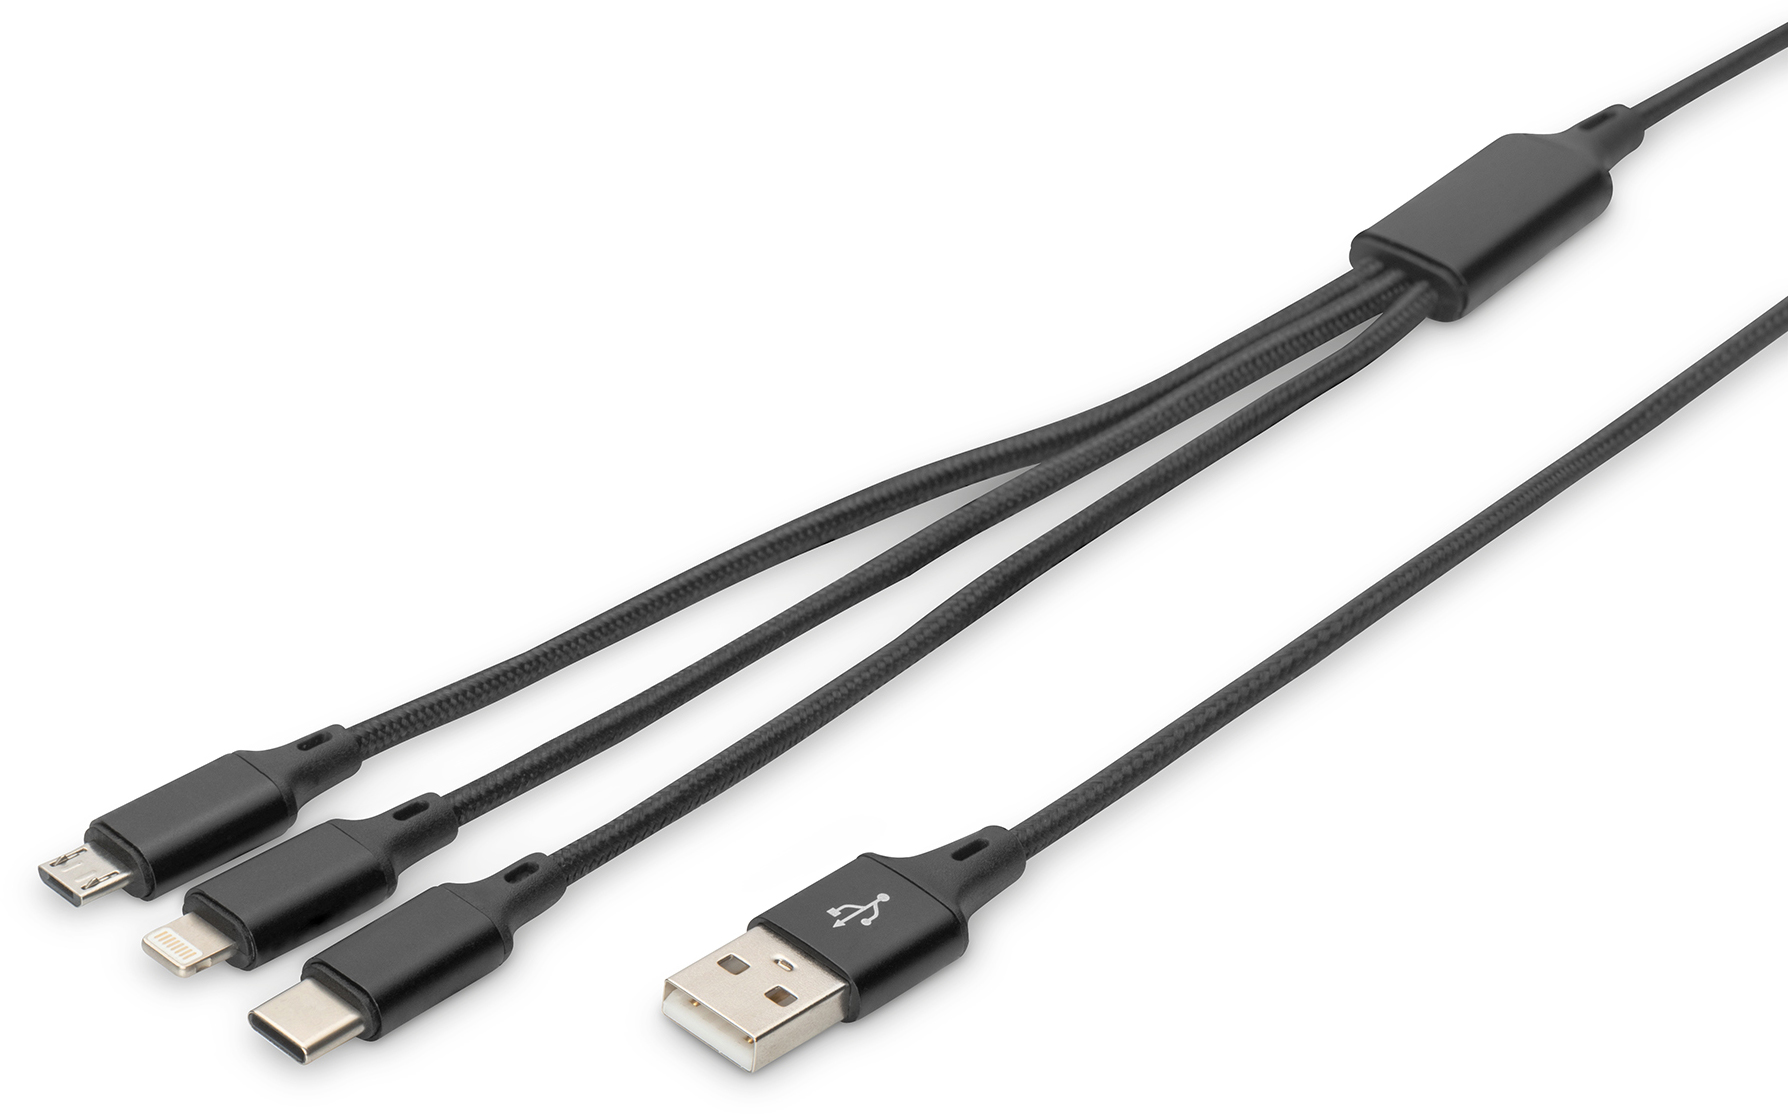 Digitus 3-in-1 Charger Cable